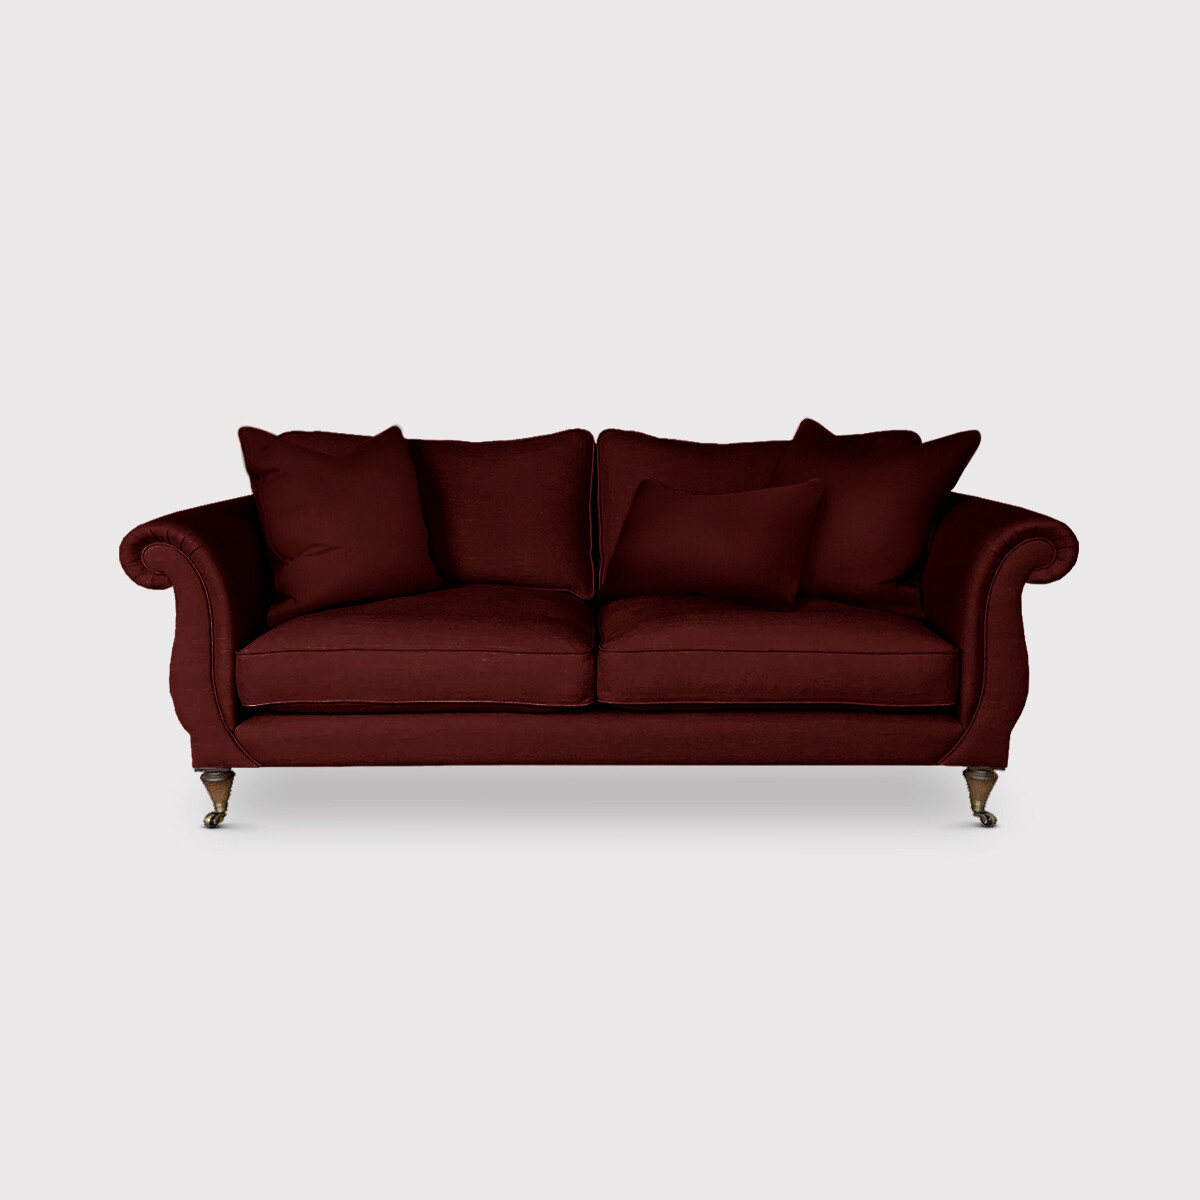 Atherton 4 Seater Sofa, Red | Barker & Stonehouse